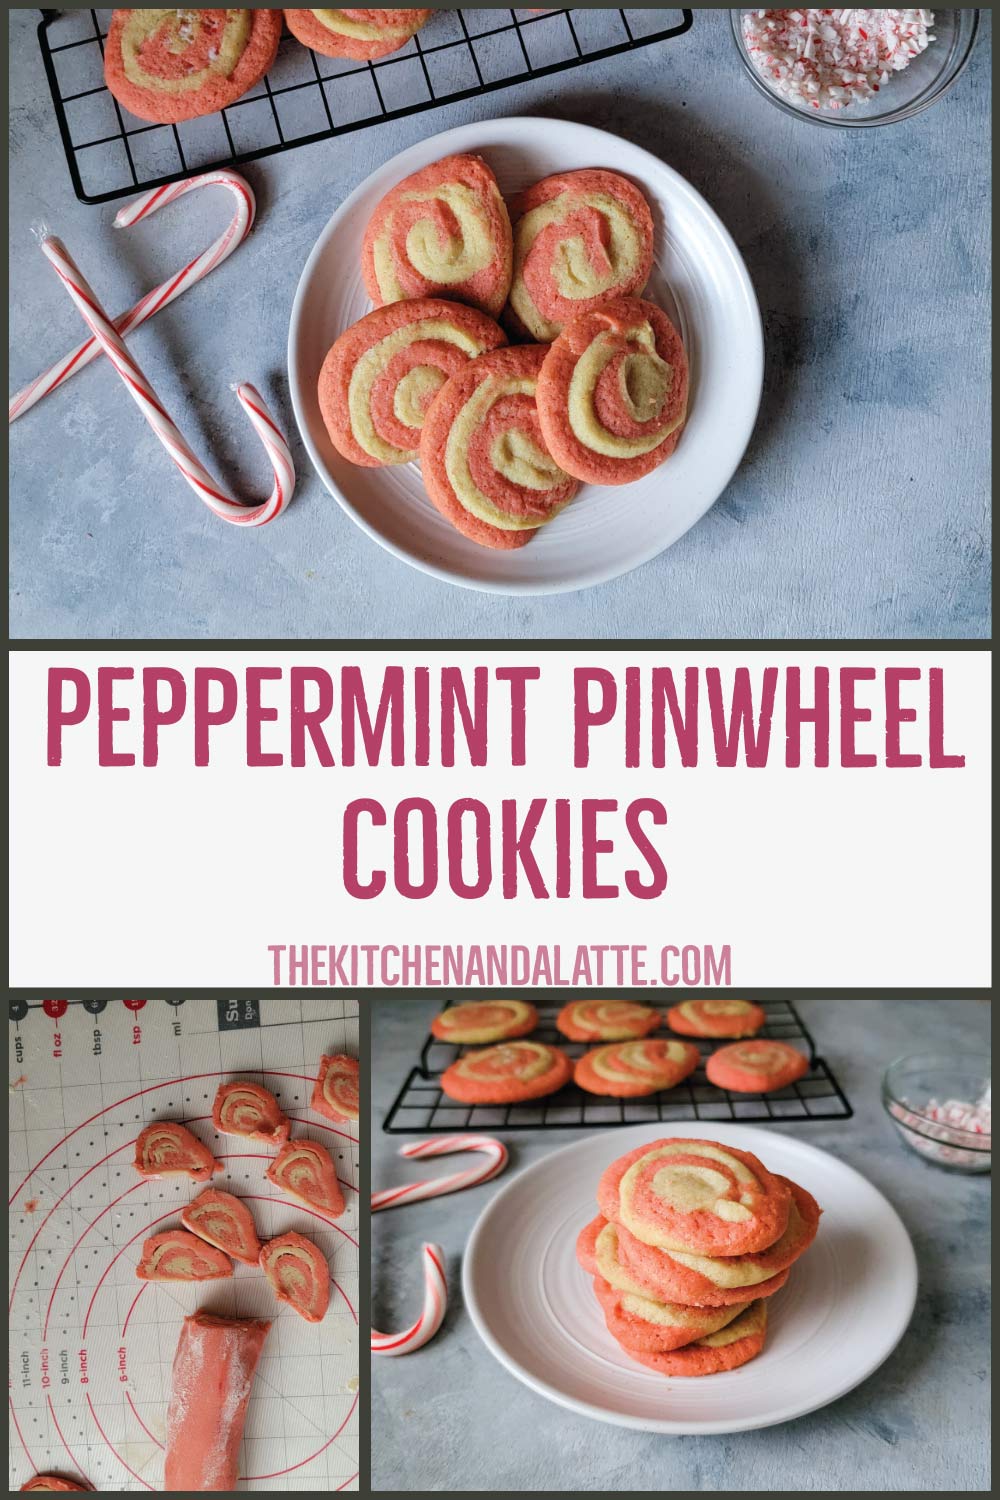 Peppermint pinwheel cookies Pinterest graphic. Dough rolled up and cut to bake. Cookies on a plate with some still on a cooling rack with candy canes for decoration.